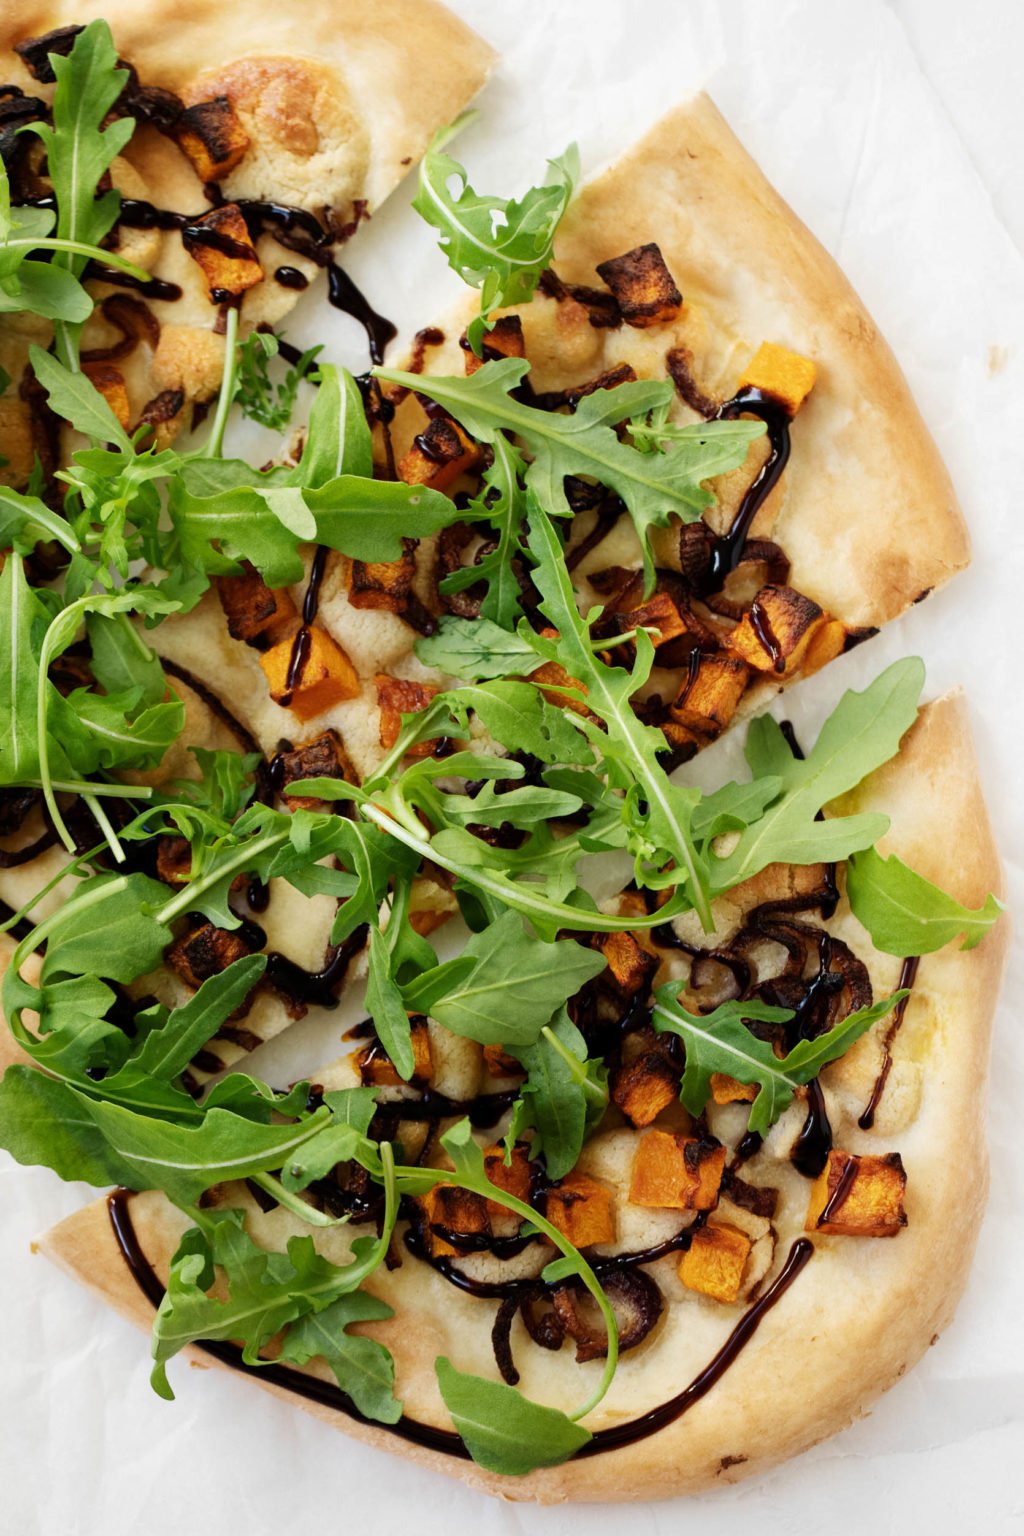 A vibrant and colorful vegan pizza for fall, topped with roasted cubes of butternuts squash, red onion, arugula, and a drizzle of balsamic glaze.